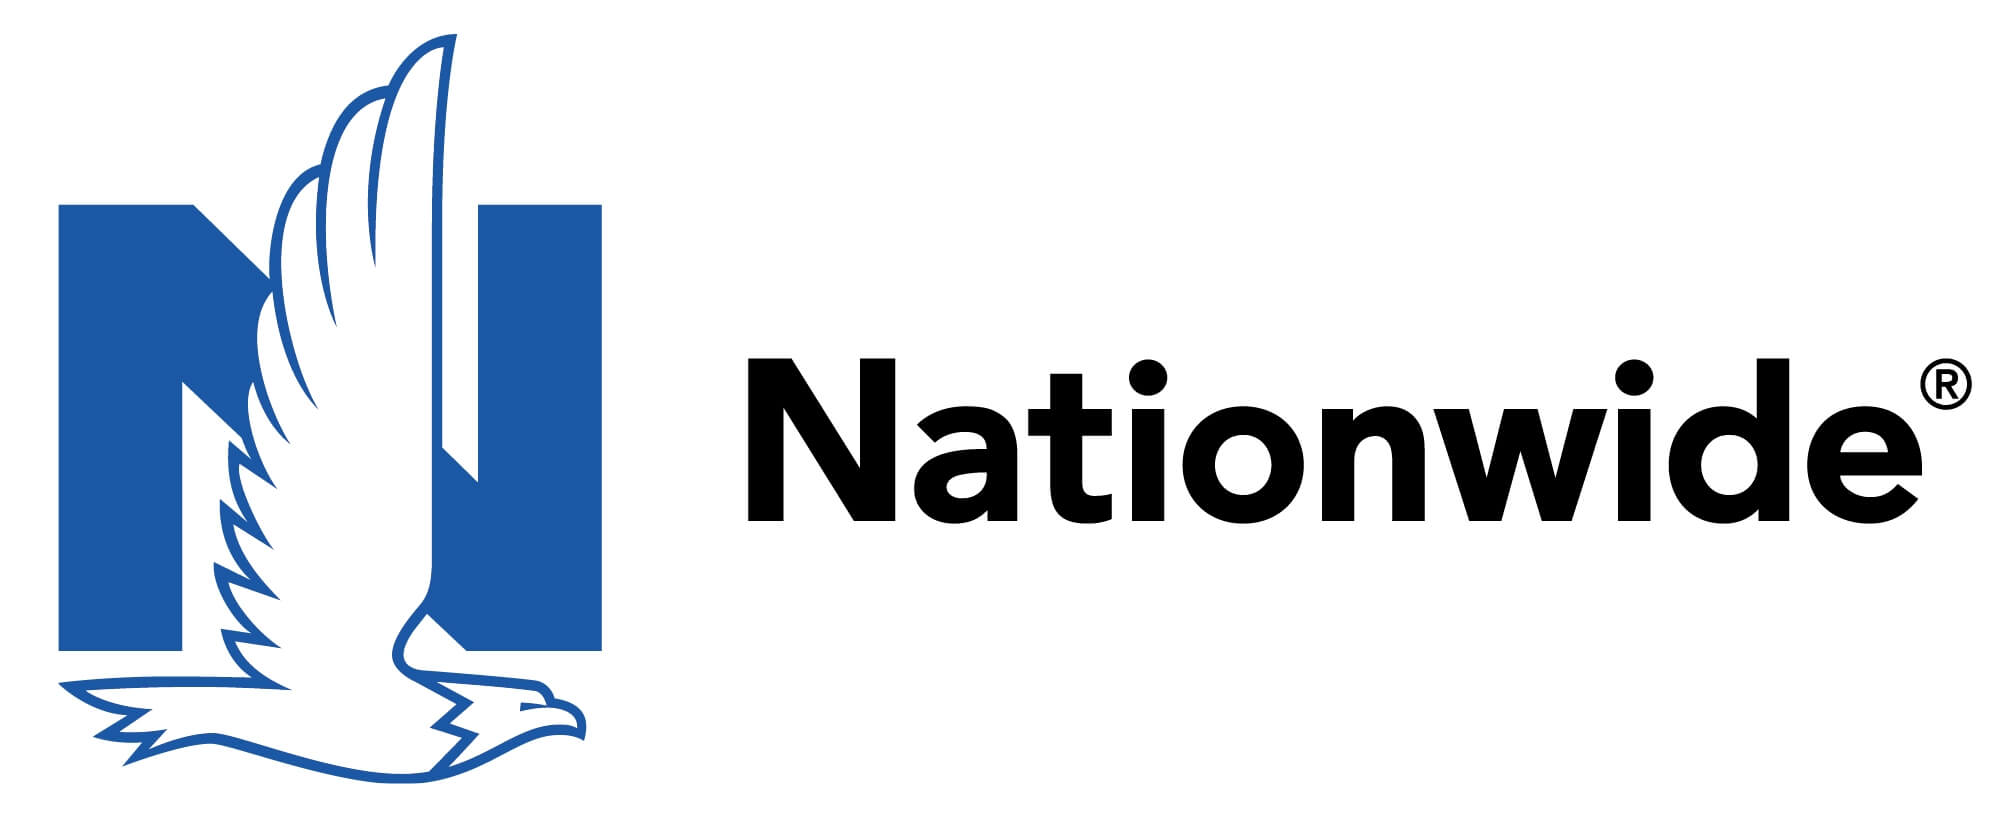 Nationwide Insurance logo for Citywide Insurance in WV